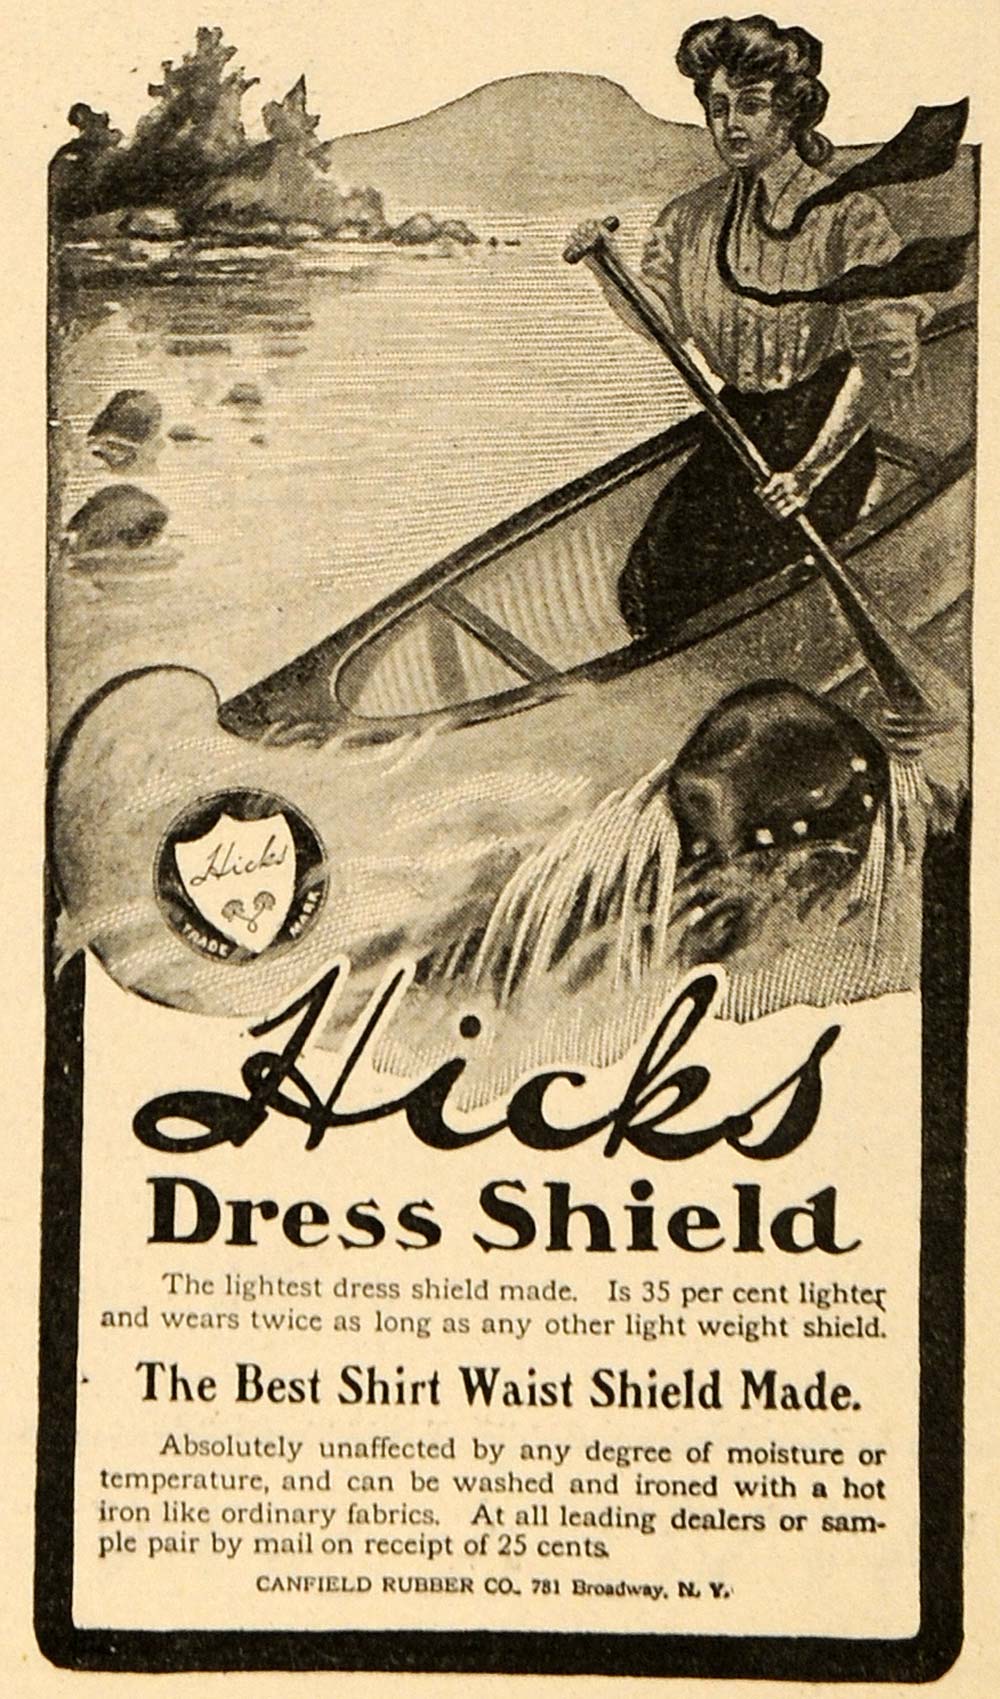 1904 Ad Canfield Rubber Hicks Dress Shield Canoeing - ORIGINAL ADVERTISING TIN4